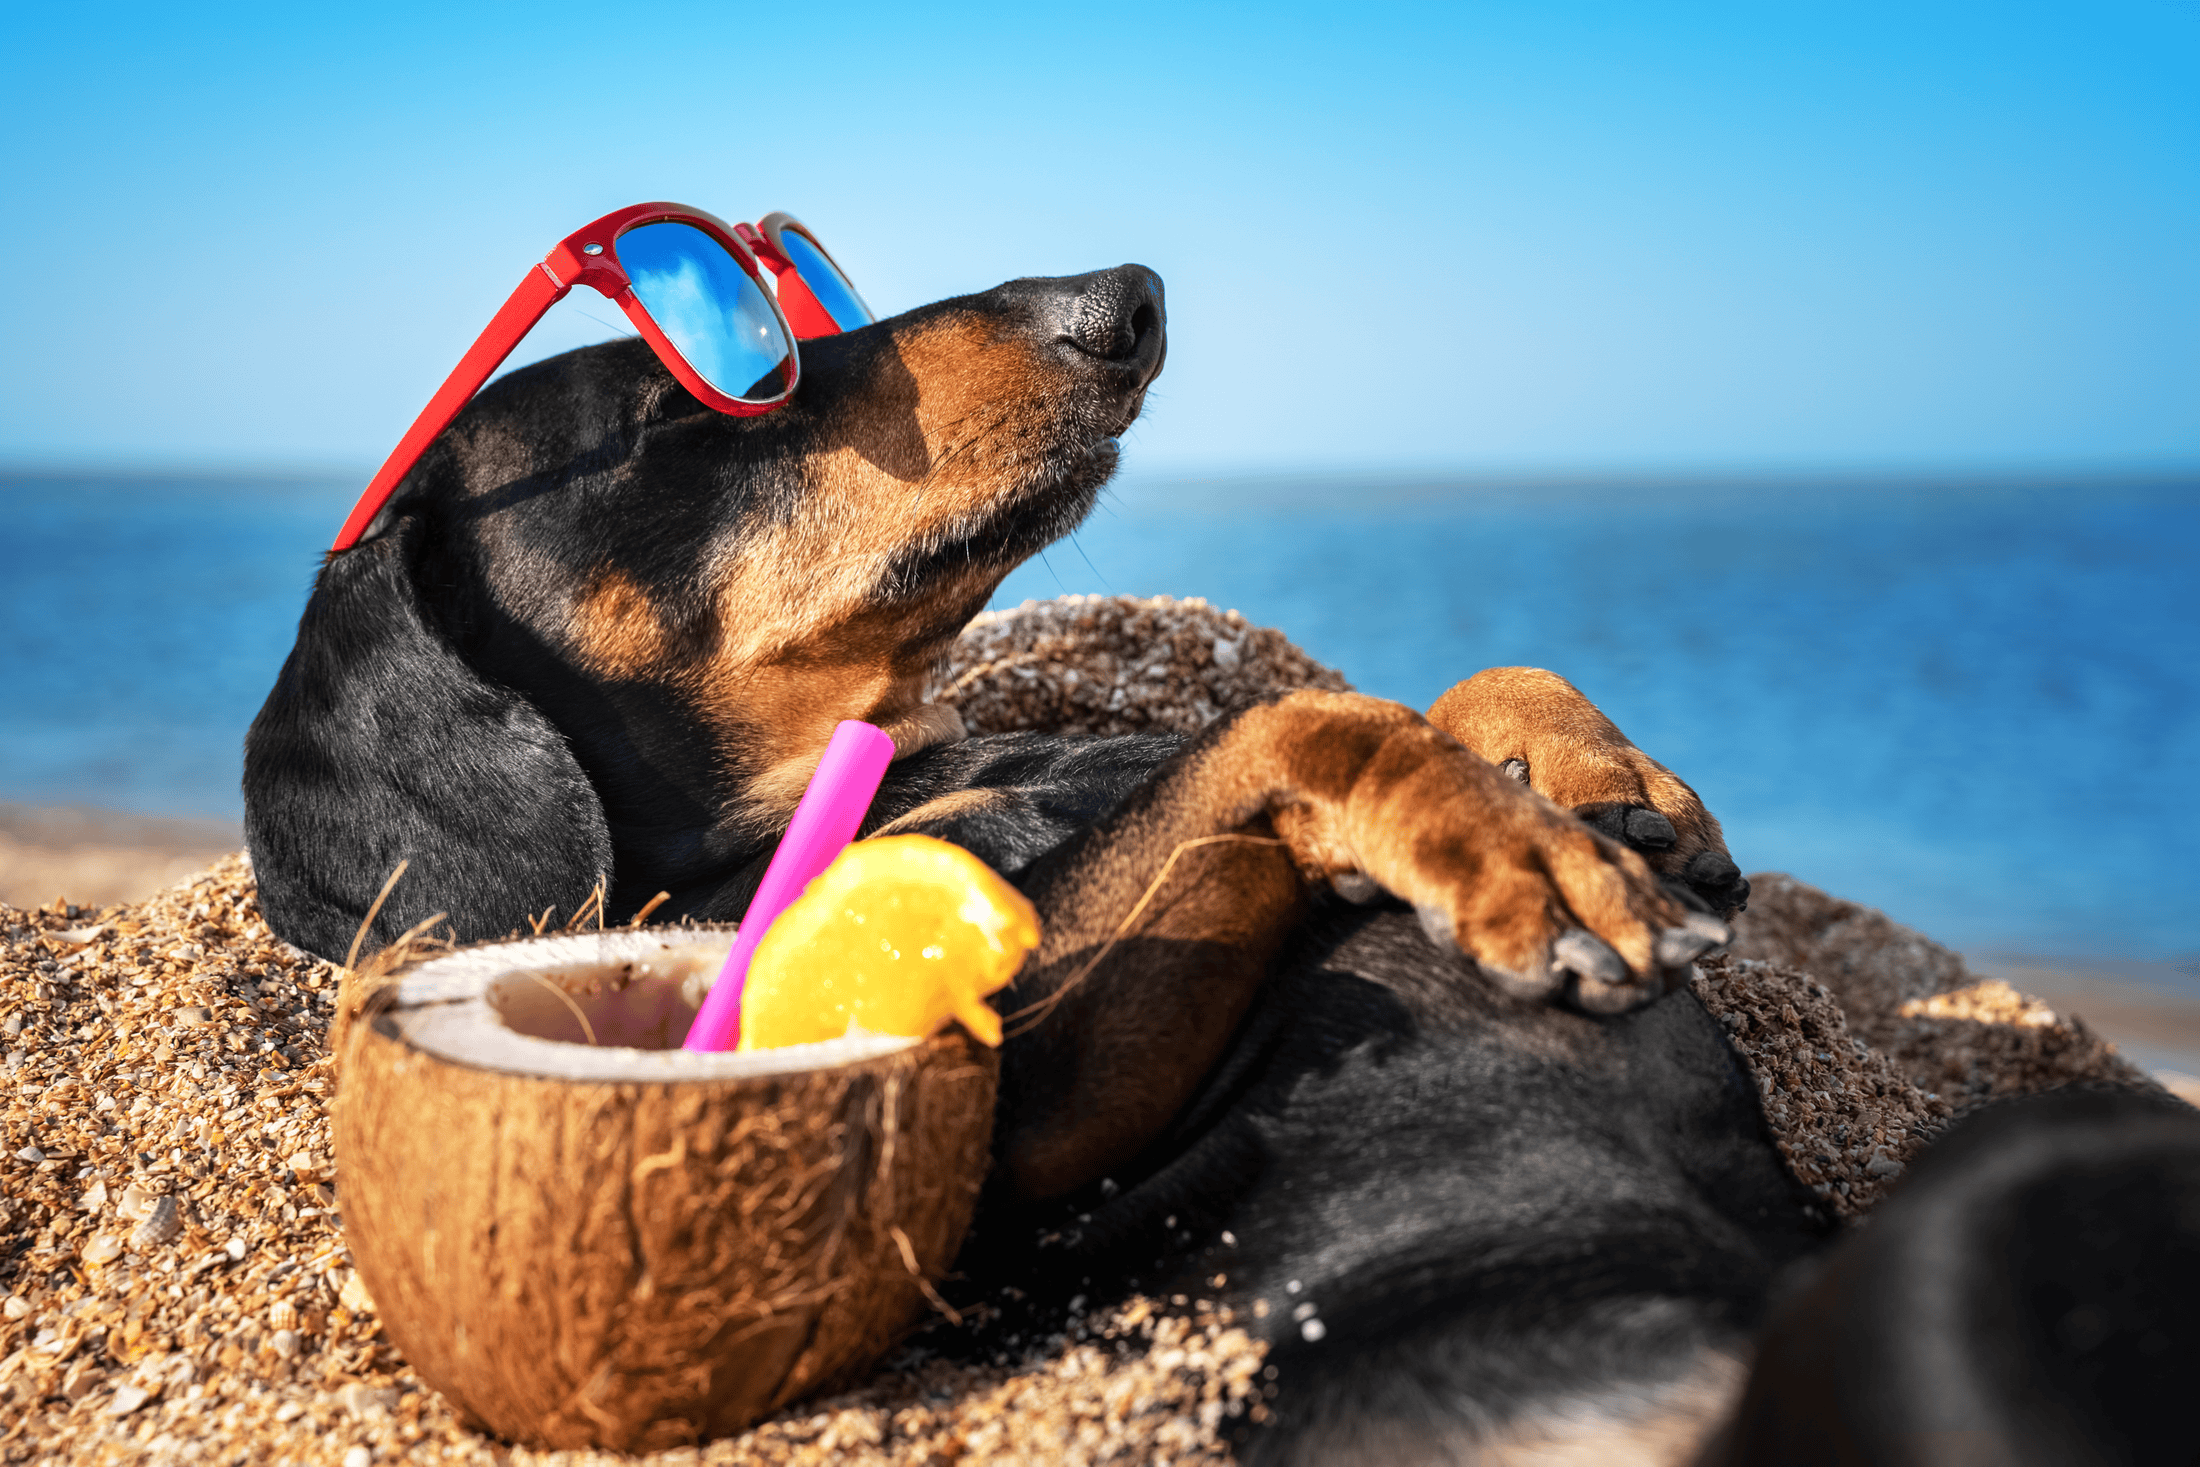 Take a trip to the beach for your dog's birthday! There are only so many birthdays in dogs' lives for celebrating joy.